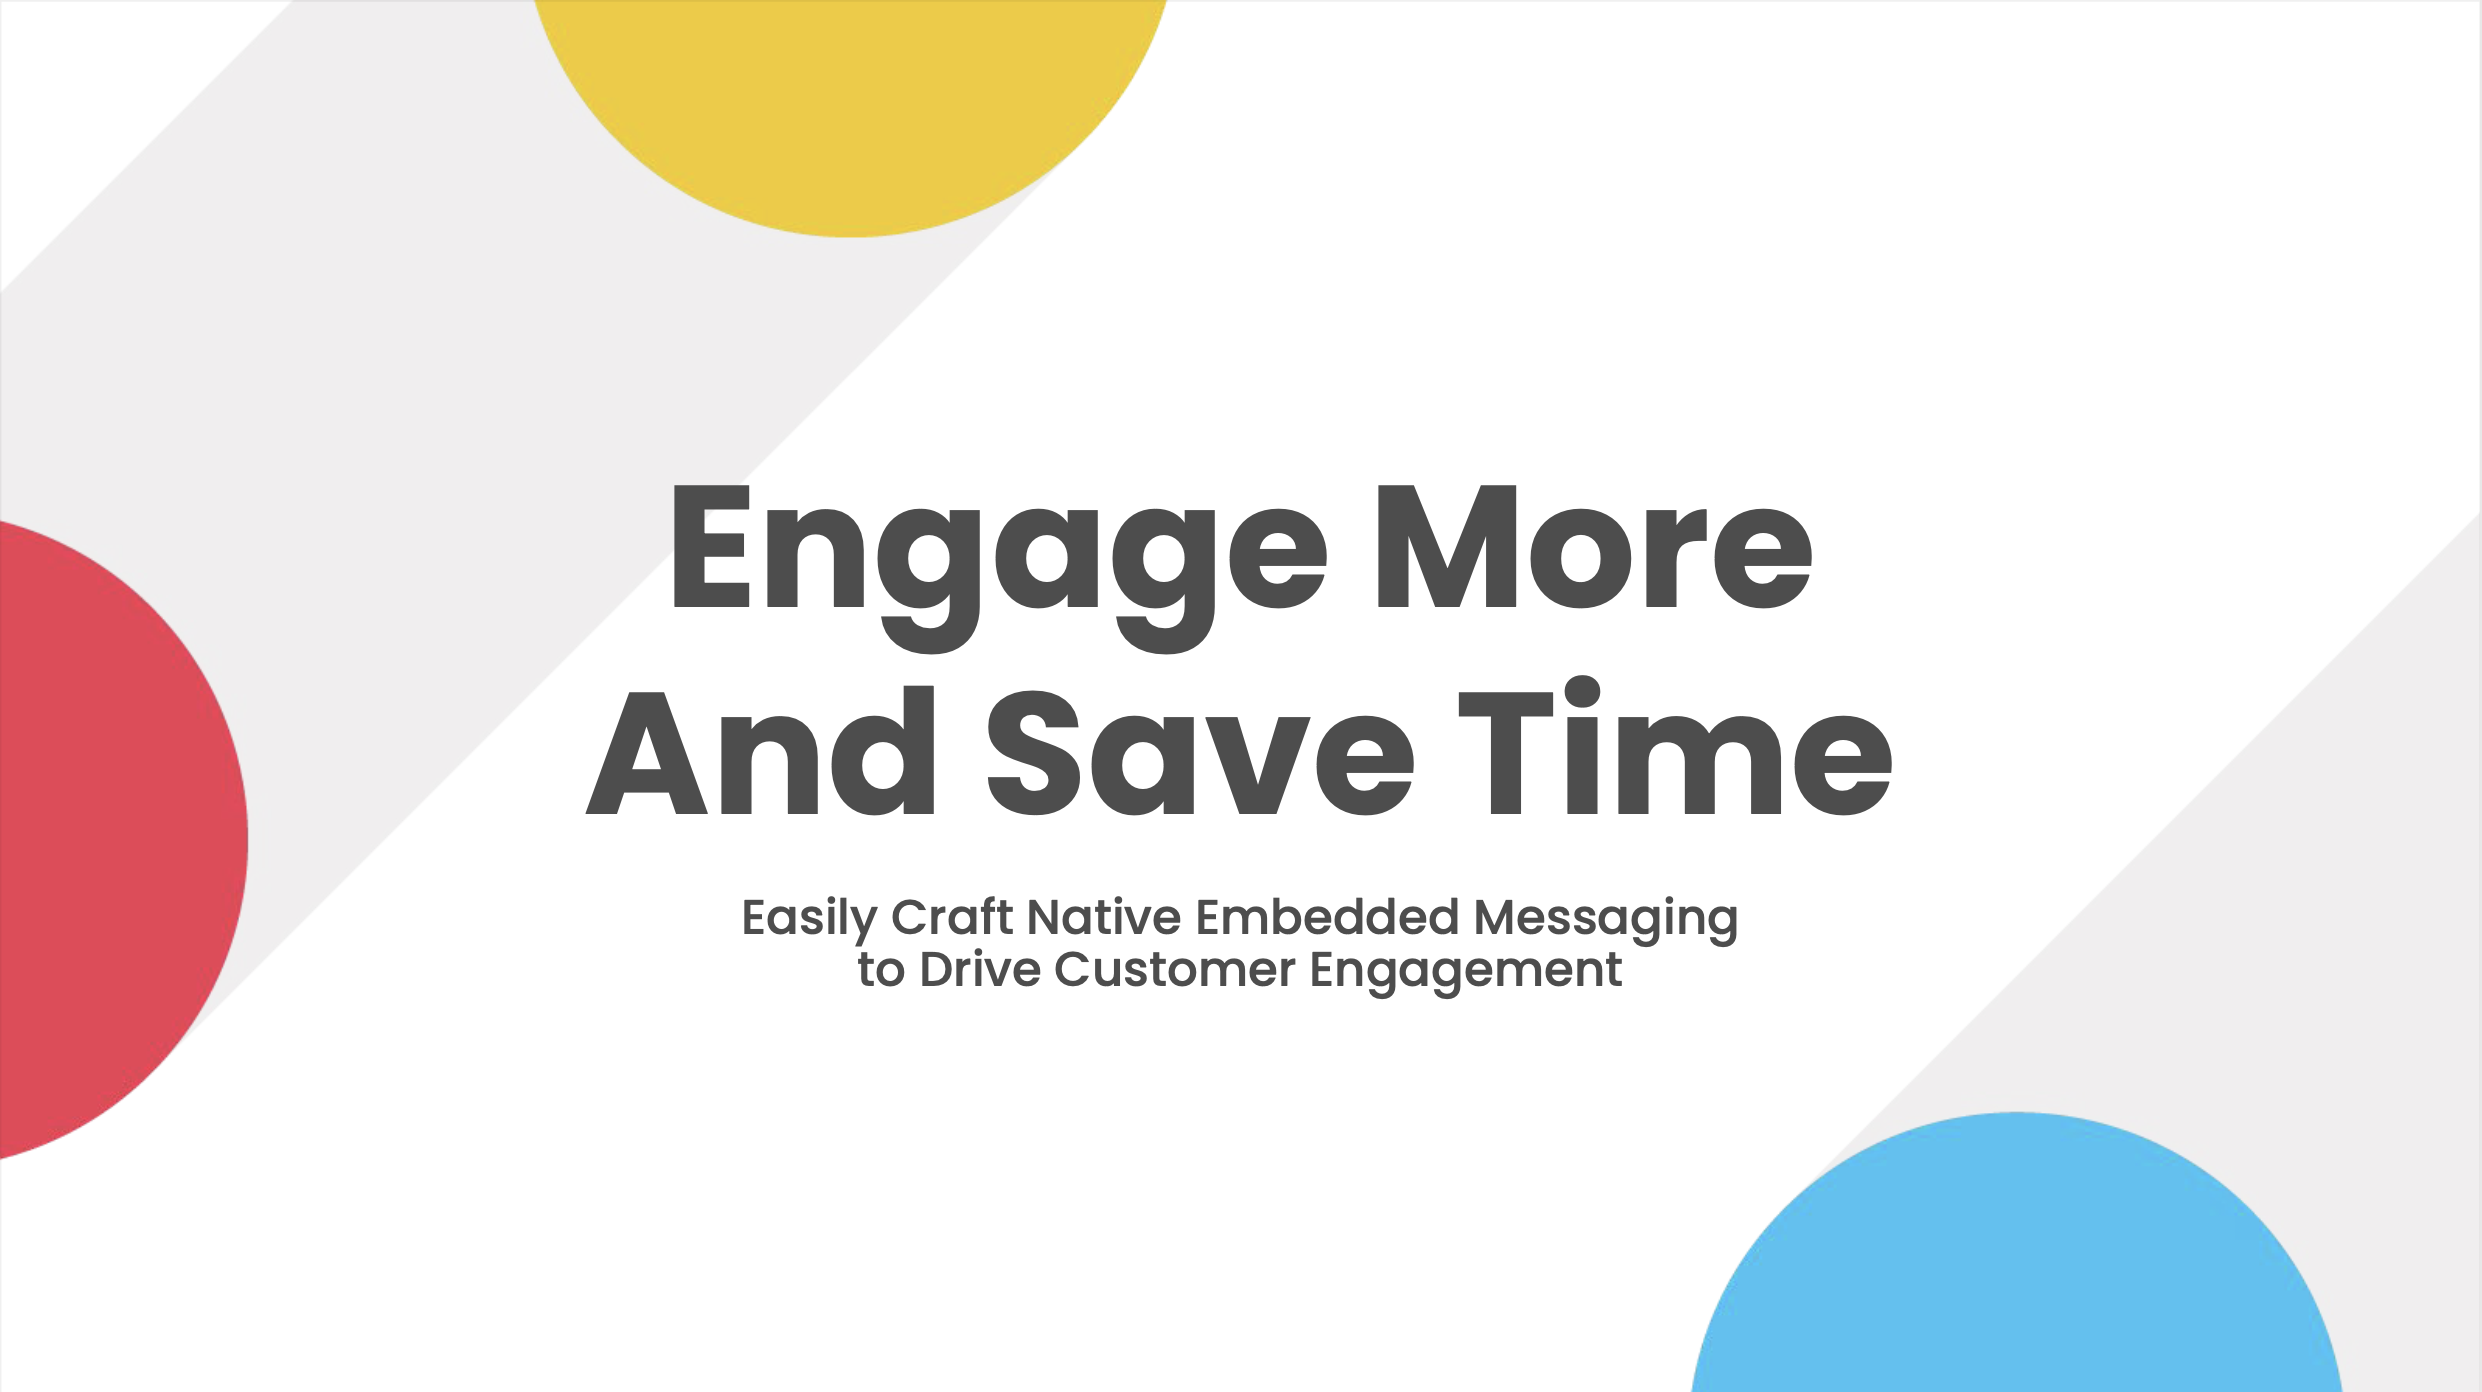 Engage More And Save Time: Easily Craft Native Embedded Messaging to Drive Customer Engagement